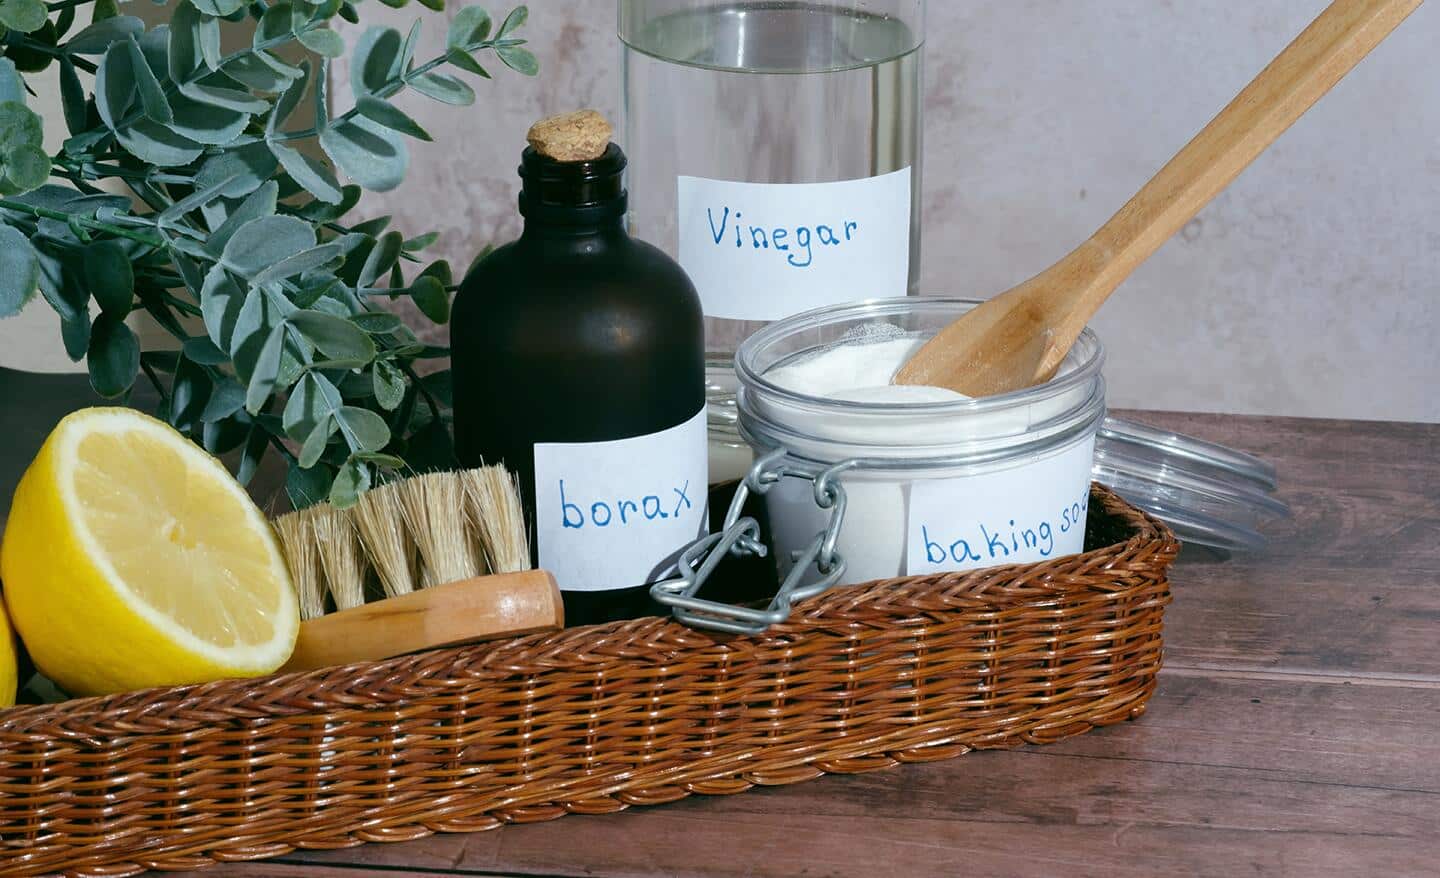 A small basket with a glass jar of borax, lemons and other natural cleaners.